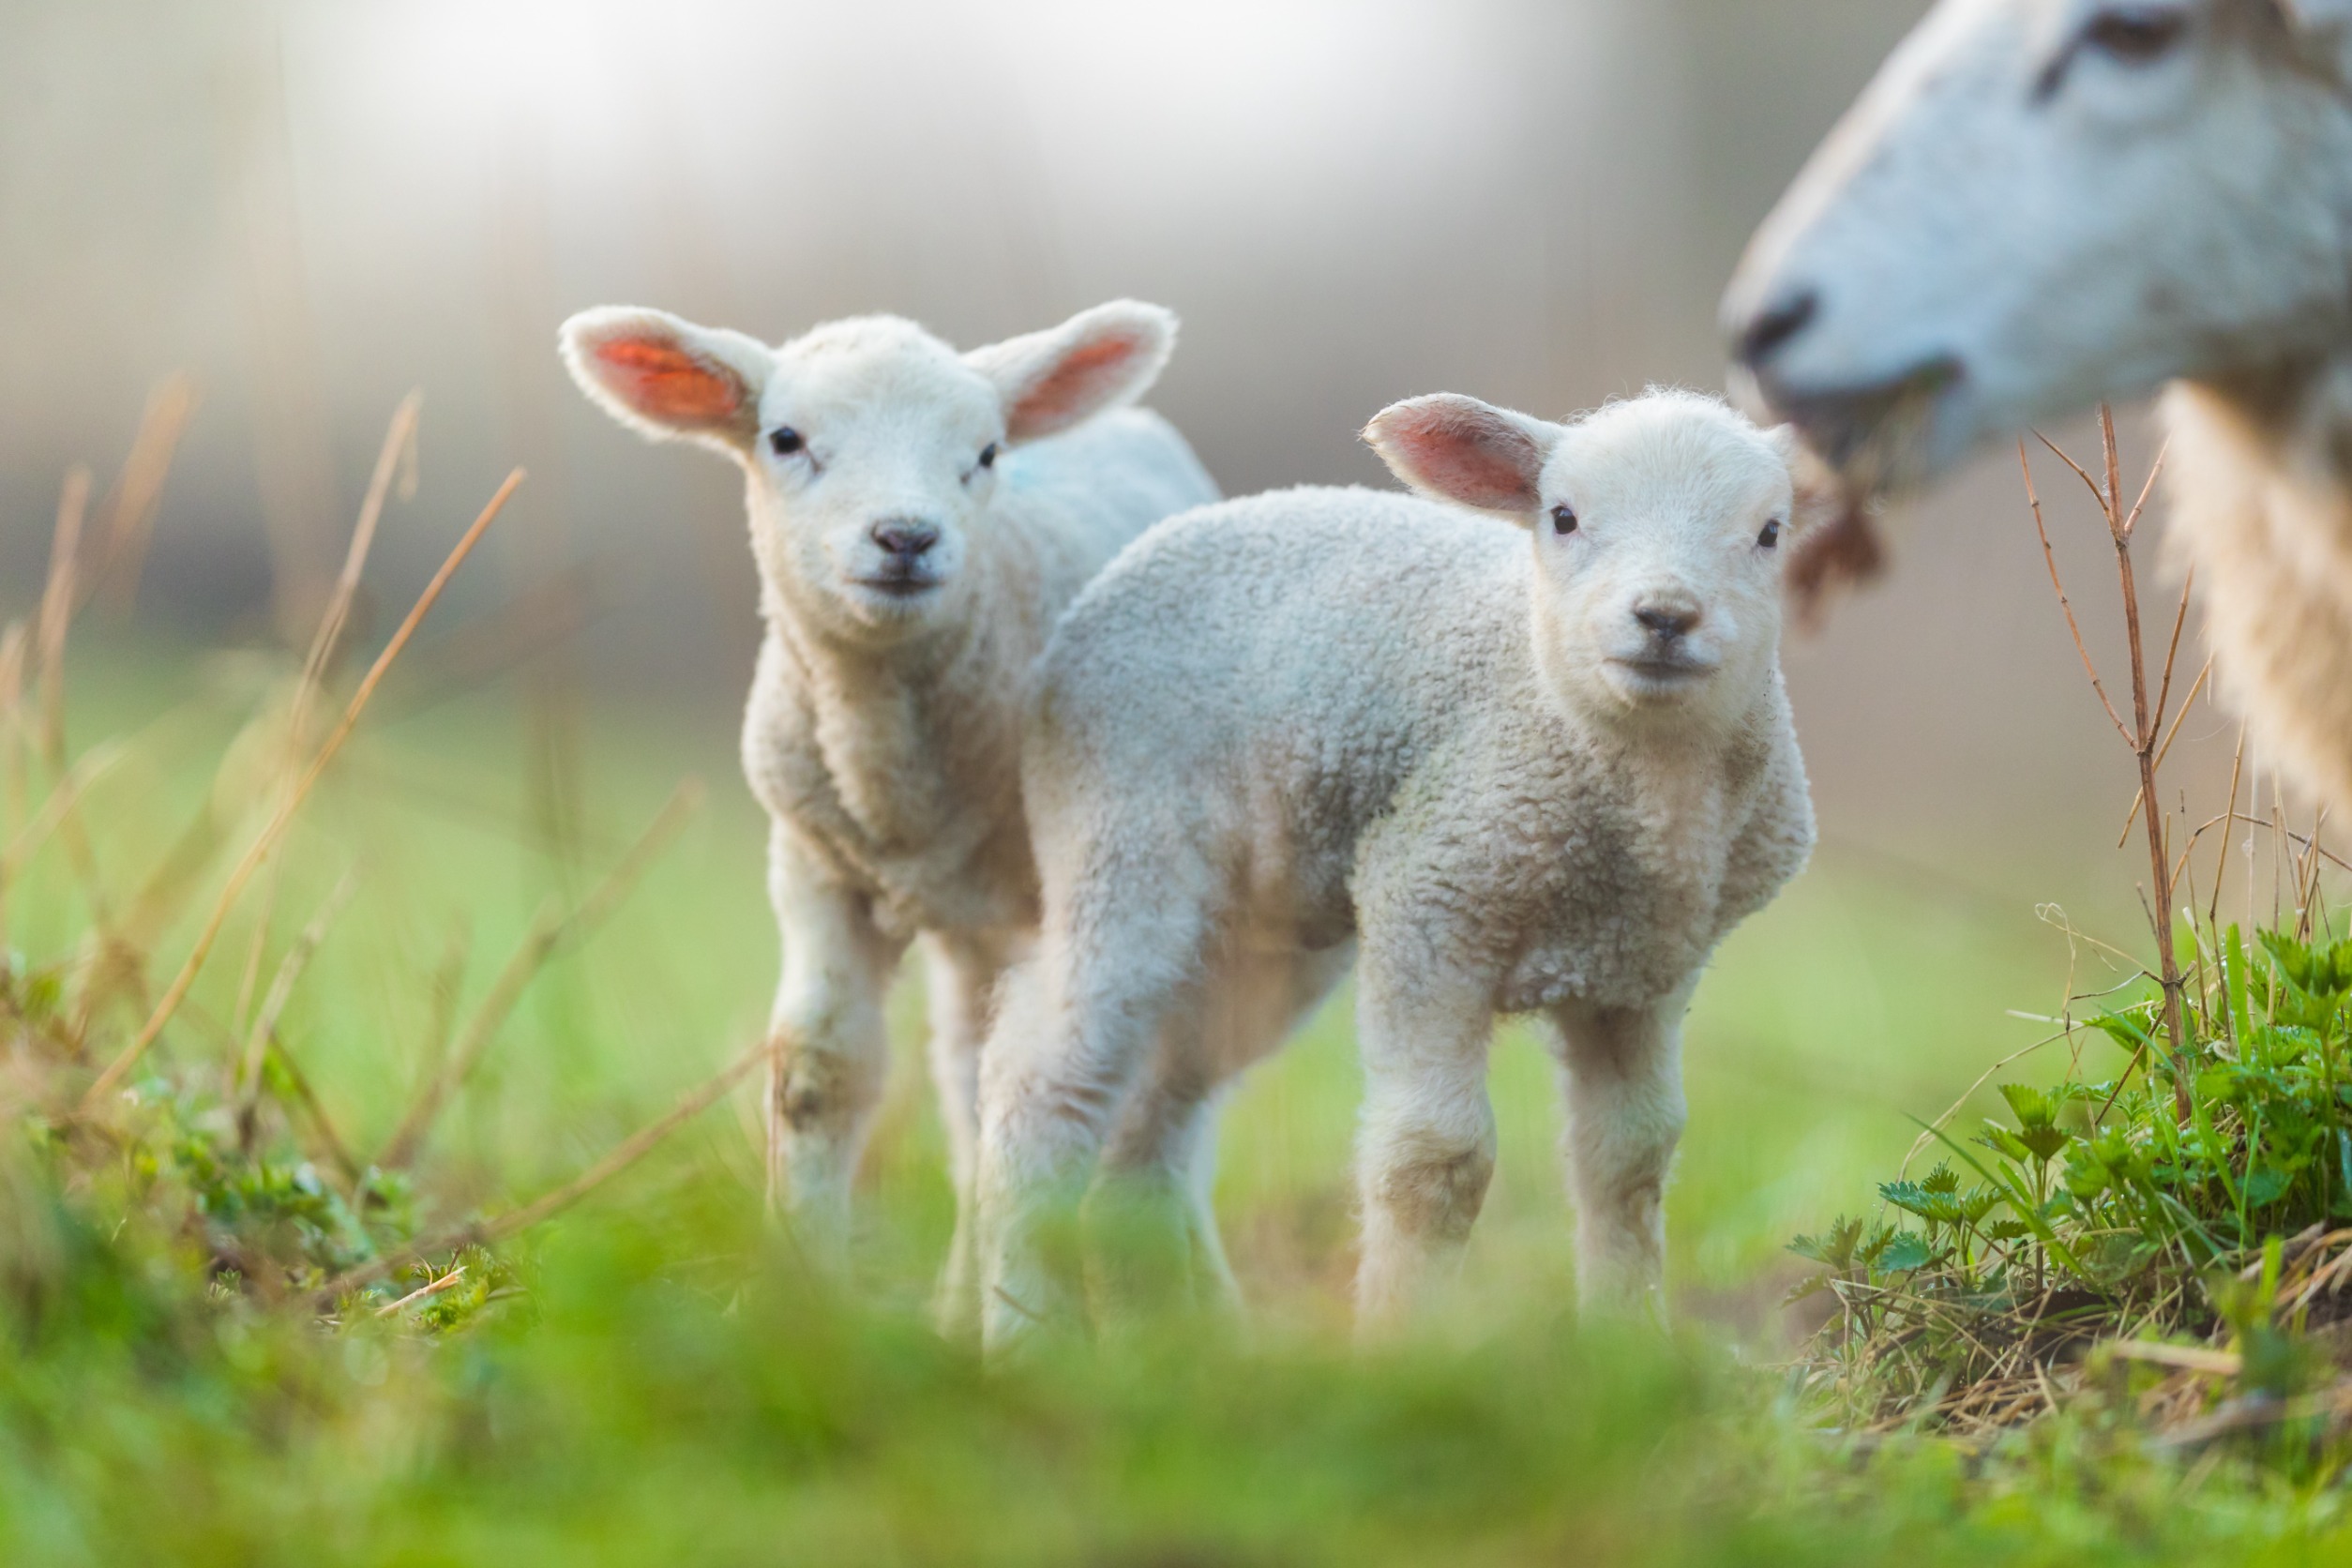 Cute young lambs with their mother on pasture, early morning in spring. Symbol of spring and newborn life.